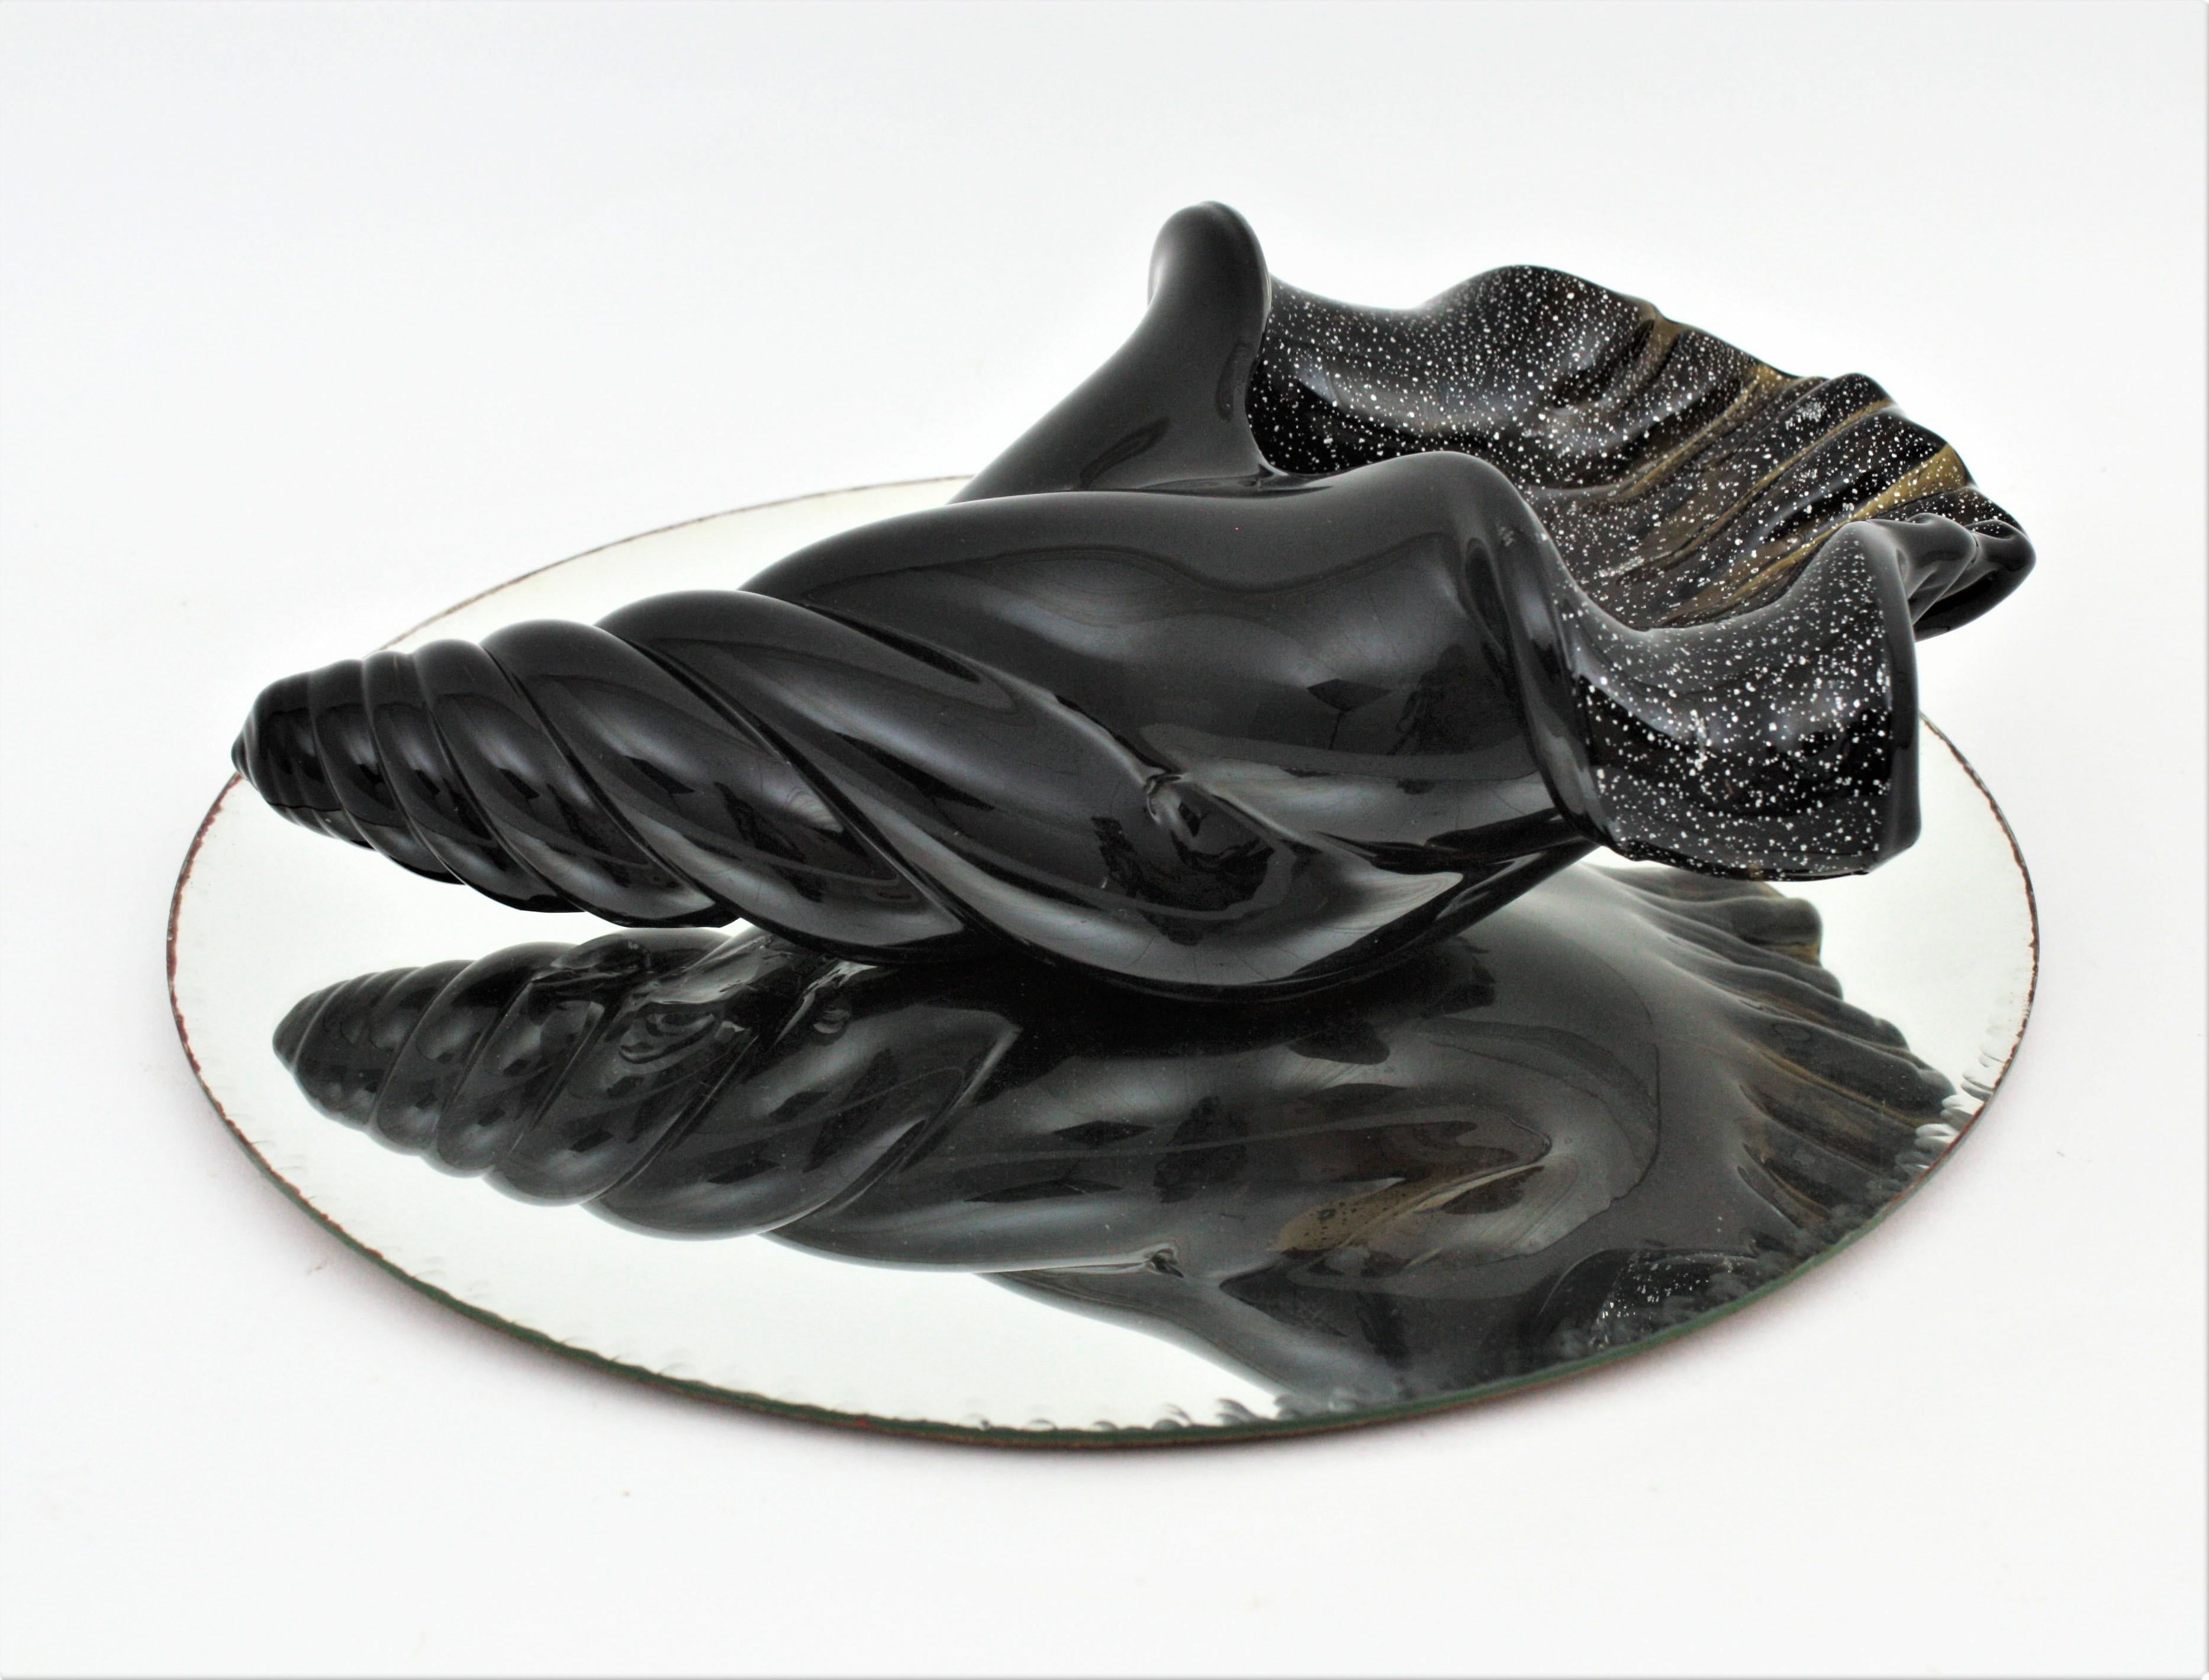 Massive hand blown black Murano glass conch seashell with aventurine silver flecks. Attributed to Archimede Seguso. Italy, 1950s.
This finely executed glass conch shell bowl /centerpiece is heavily decorated with silver flecks and controlled